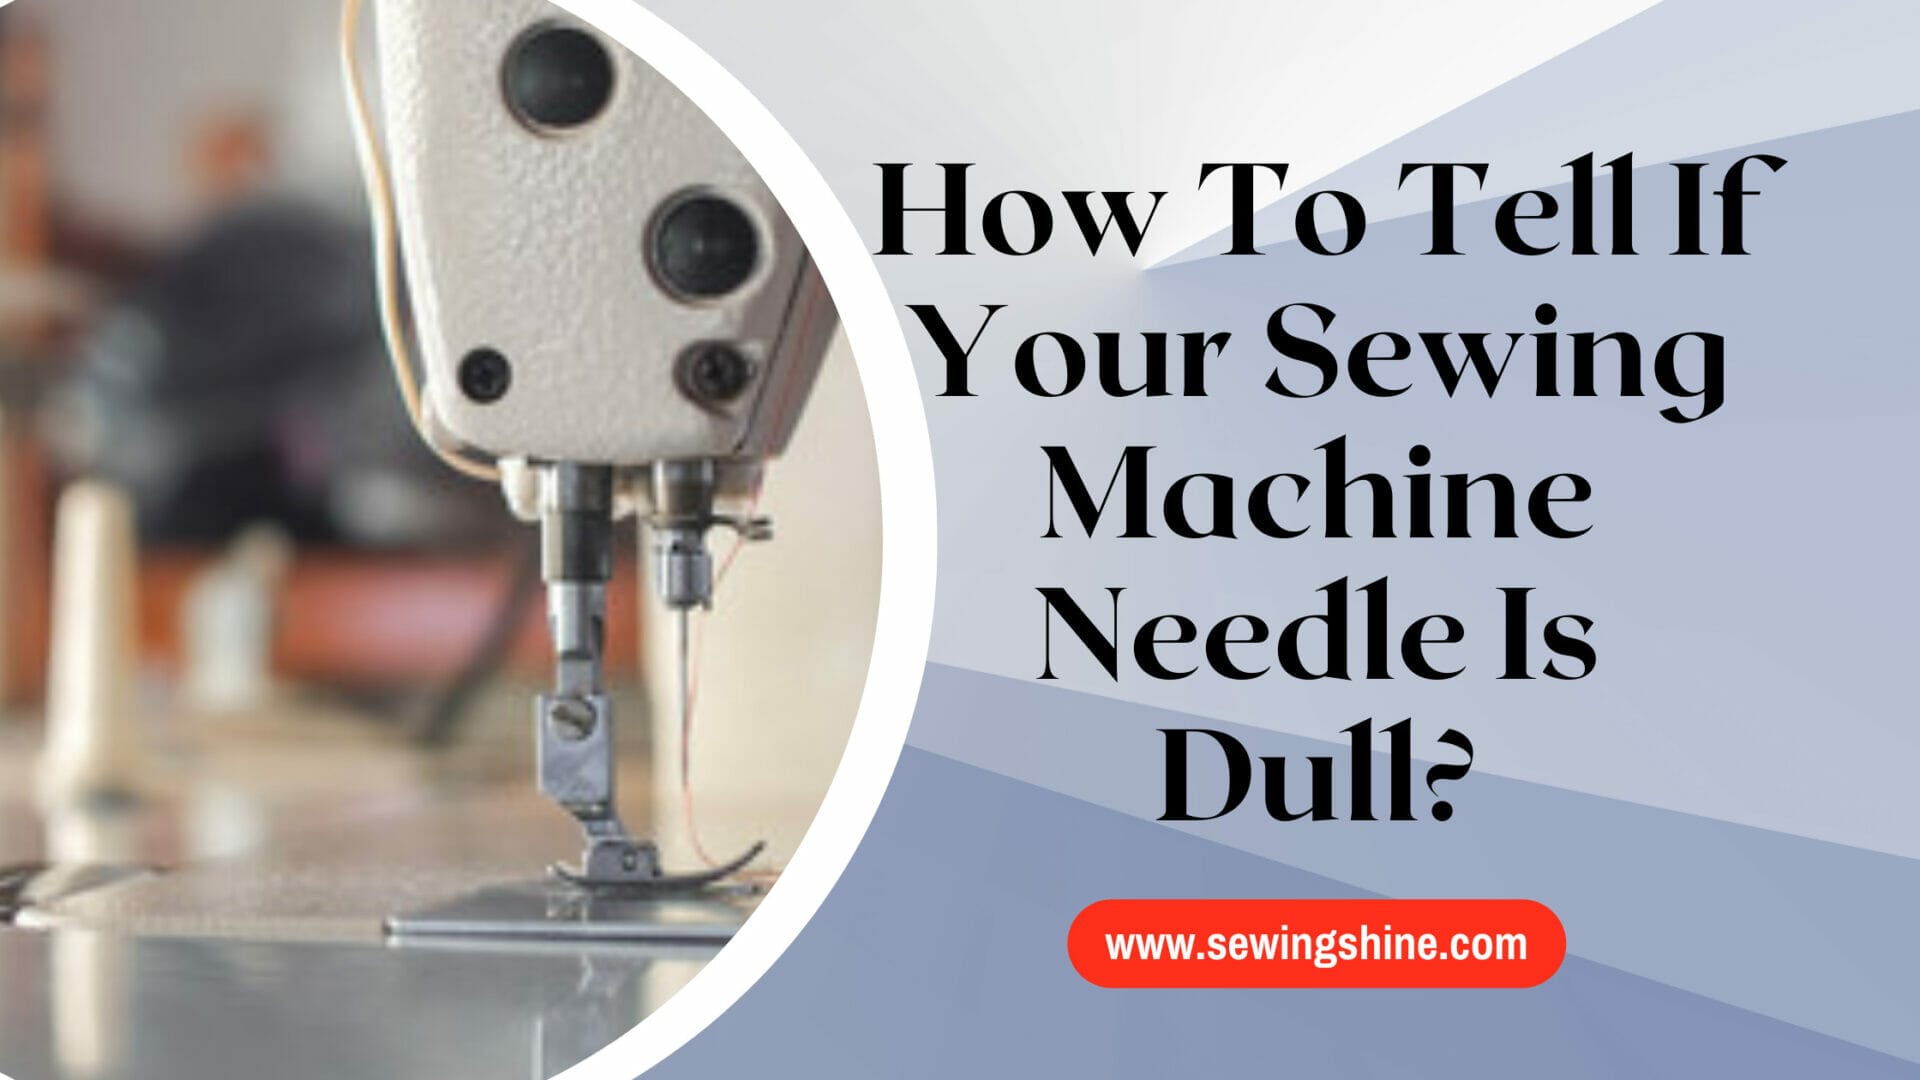 How To Tell If Your Sewing Machine Needle Is Dull? (2023)